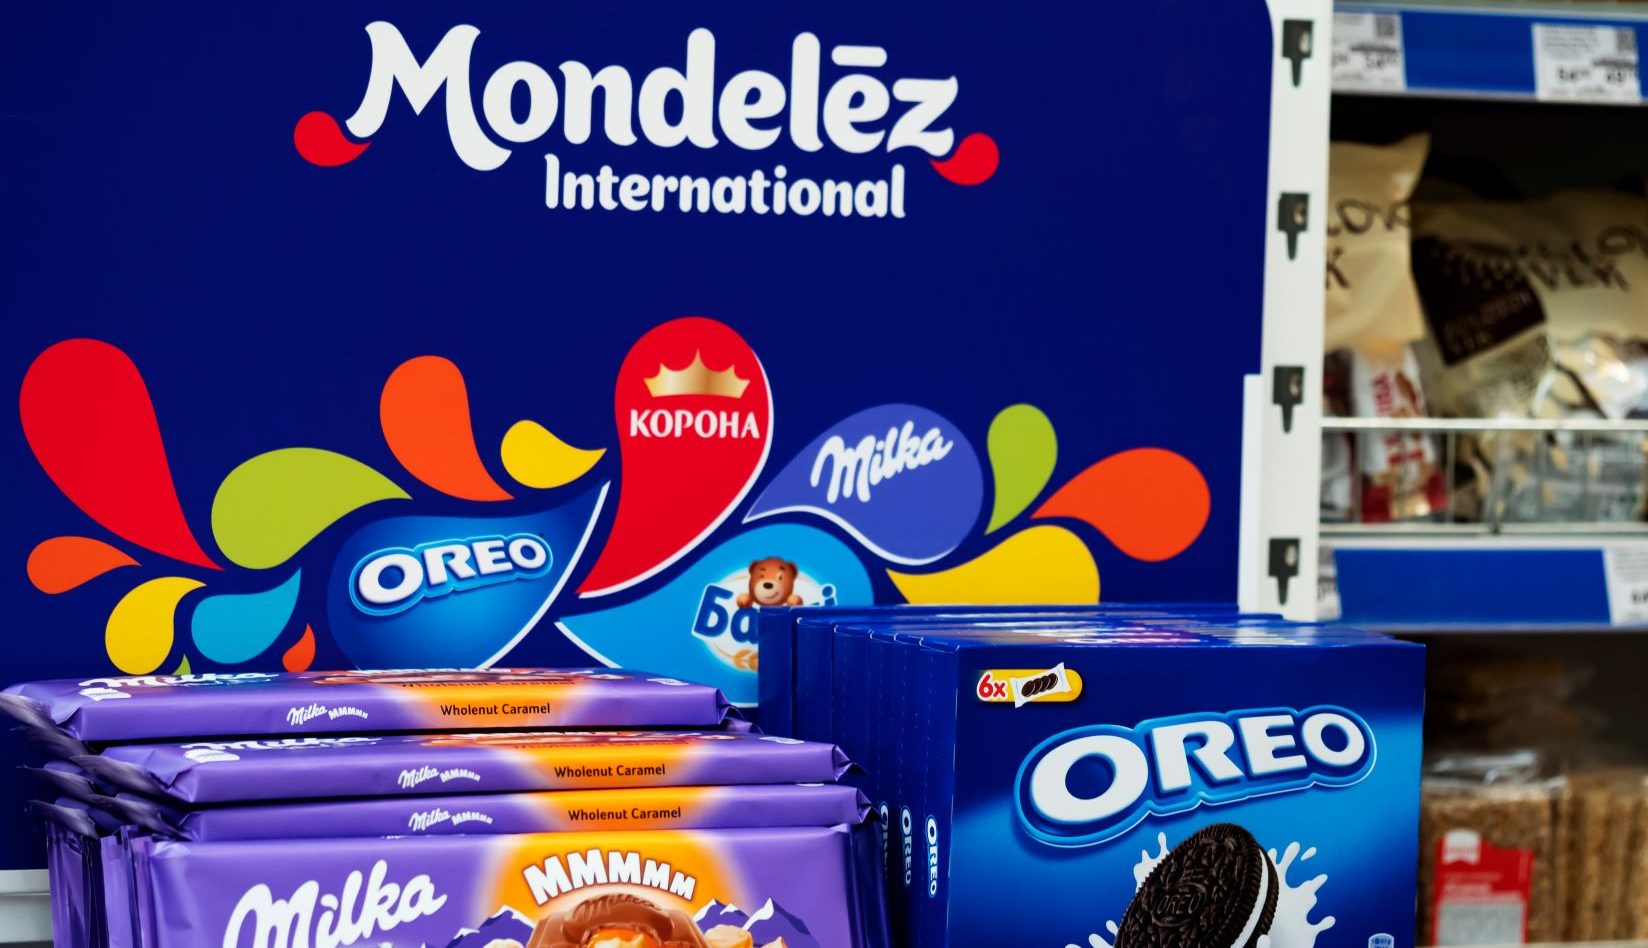 Mondelez has committed to reach net zero emissions by 2050 across its entire value chain.  